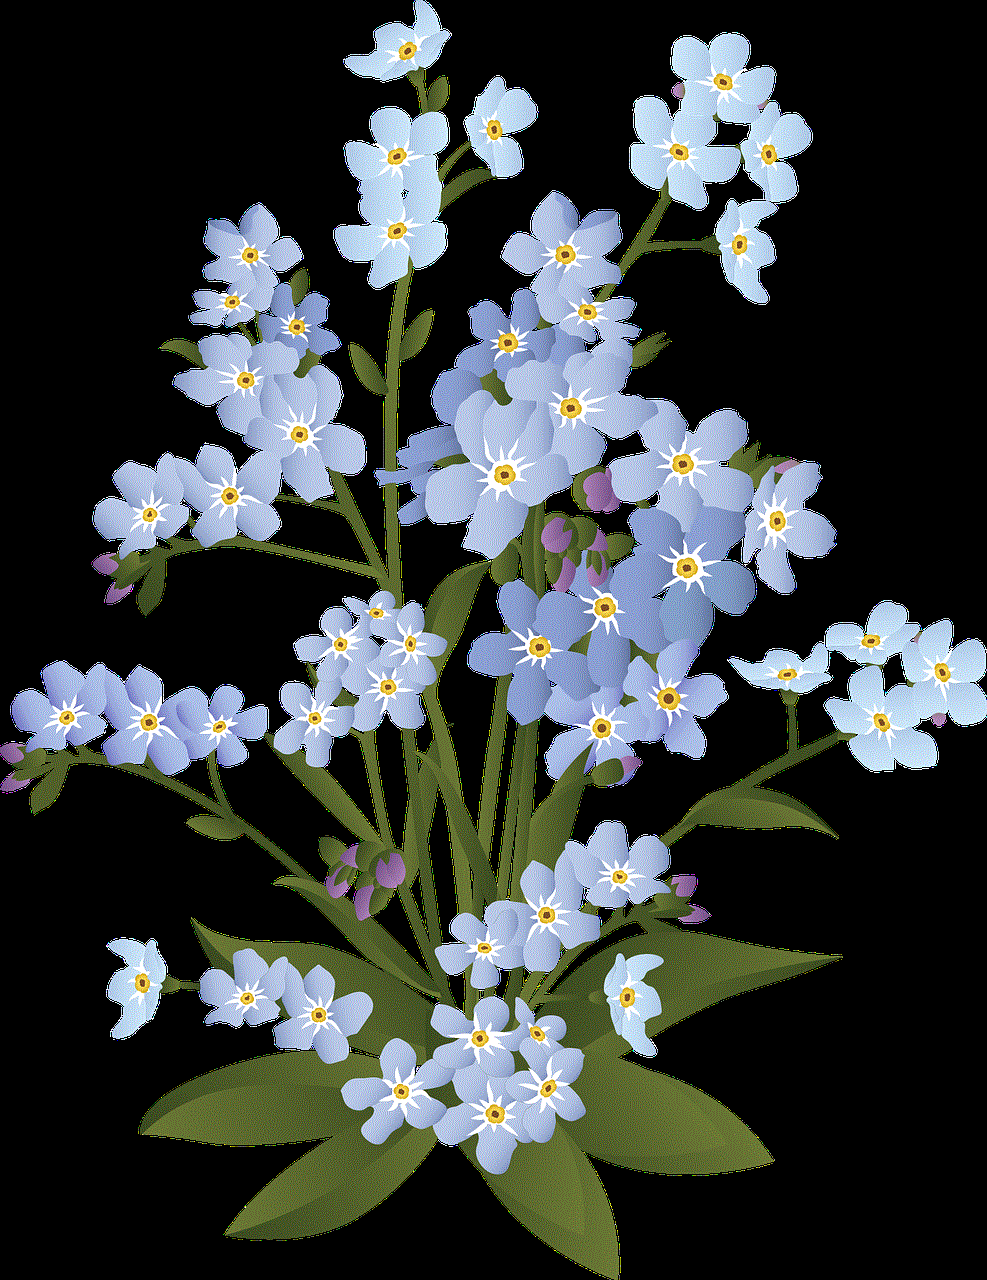 Forget-Me-Not Flower Wallpaper